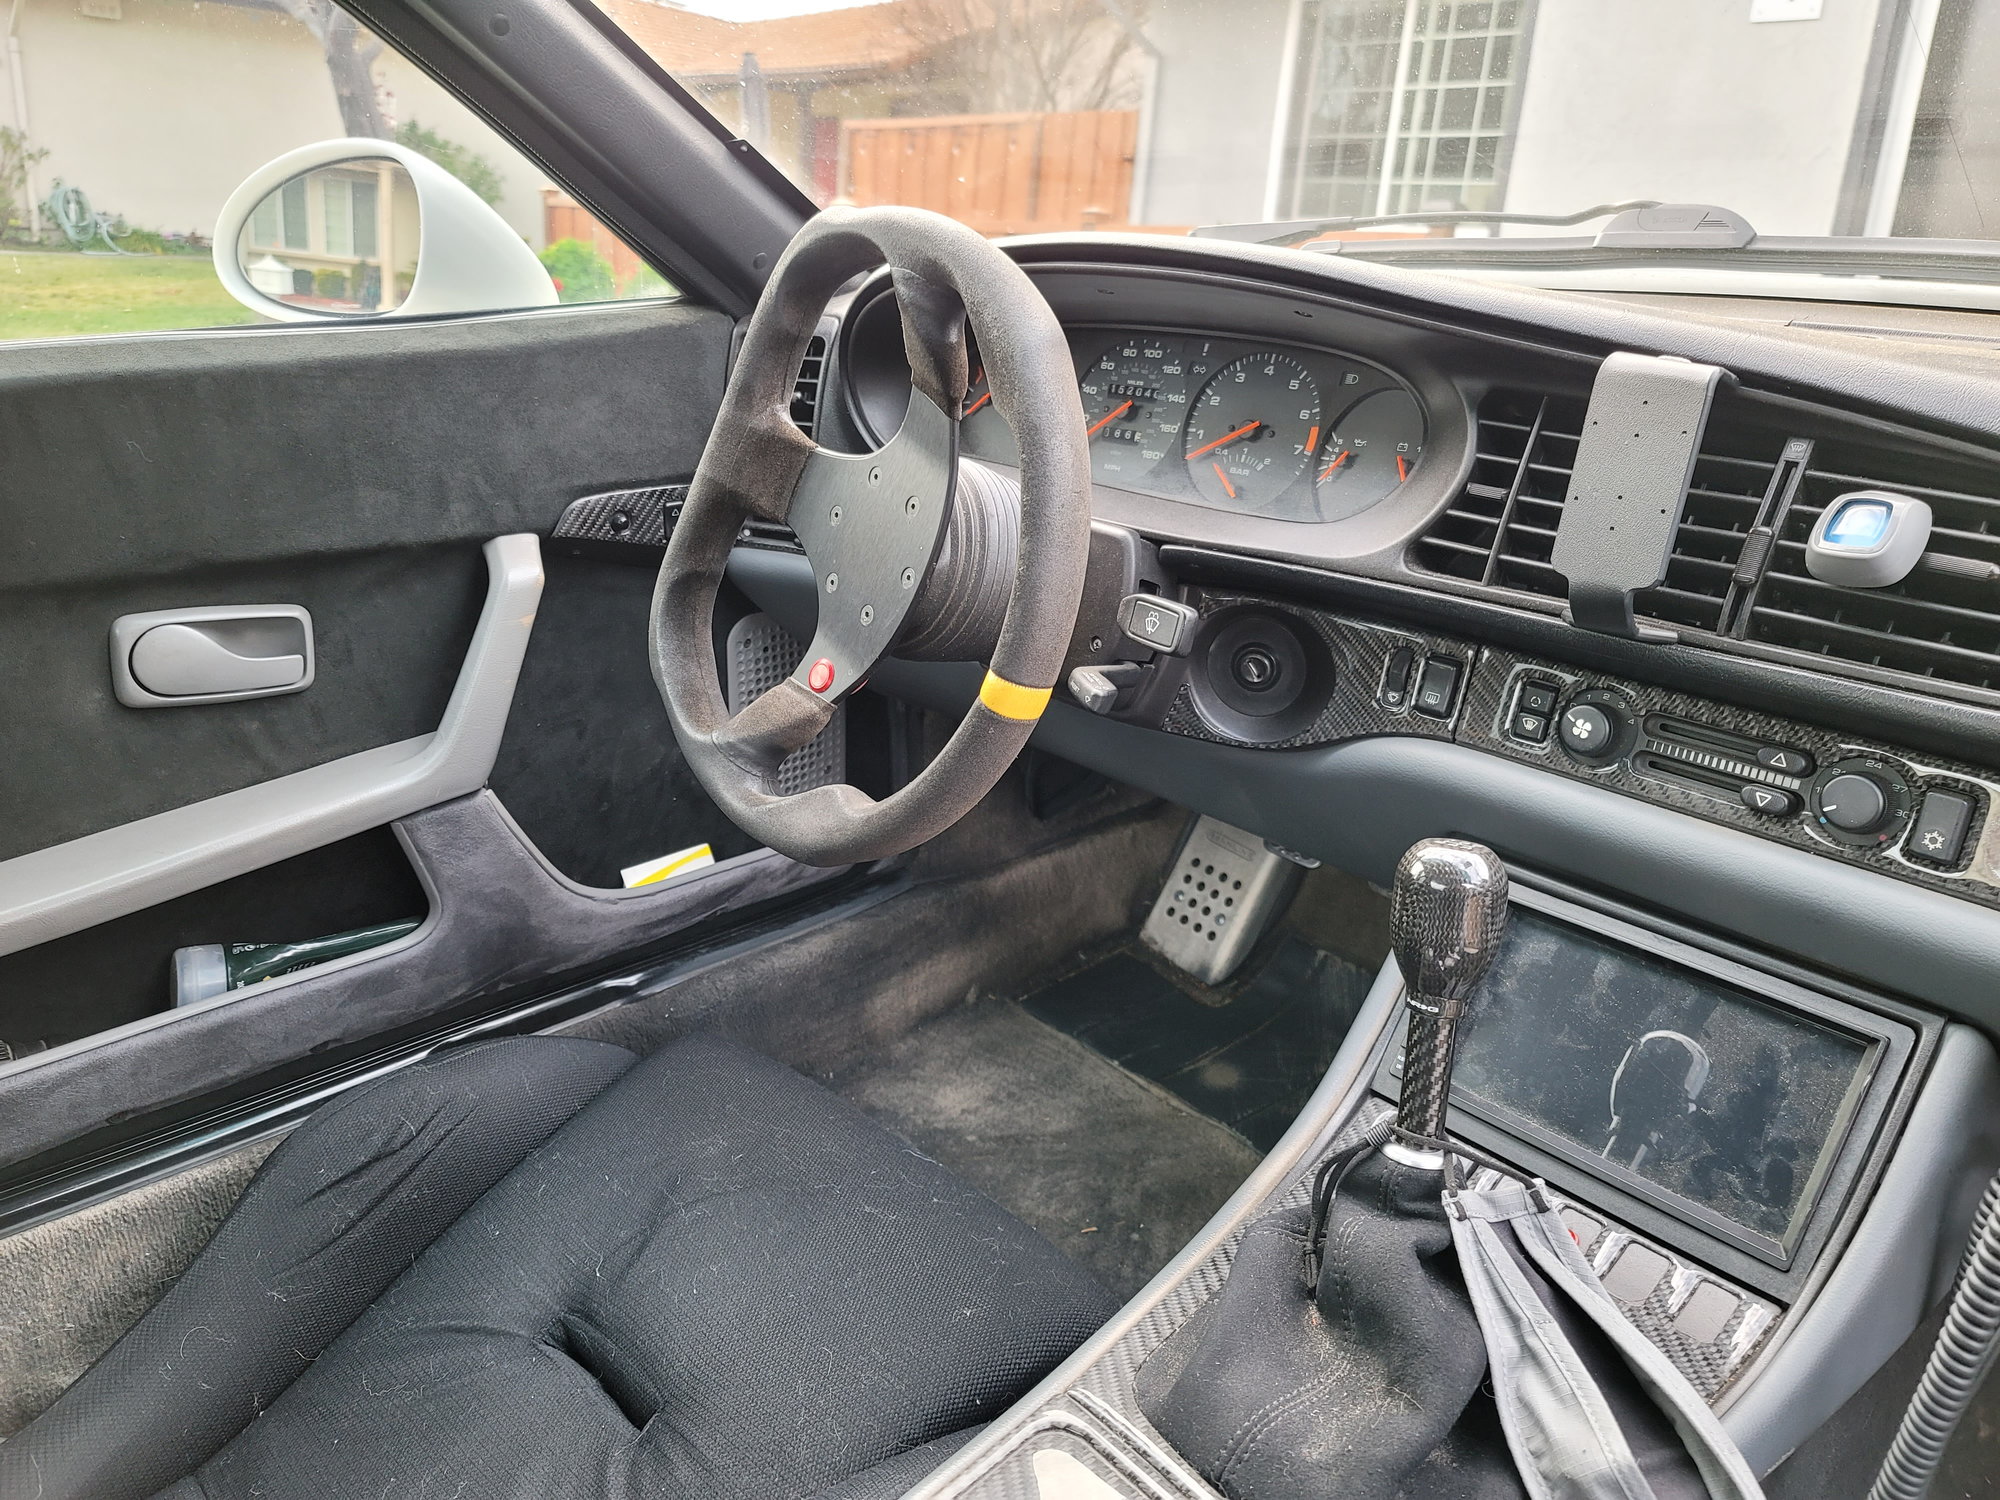 1987 Porsche 944 - 1987 Porsche 944 Turbo, Street and Track Car plus option on 3l motor parts - Used - VIN WP0AA2950HN150412 - 4 cyl - 2WD - Manual - Coupe - White - San Jose, CA 95124, United States